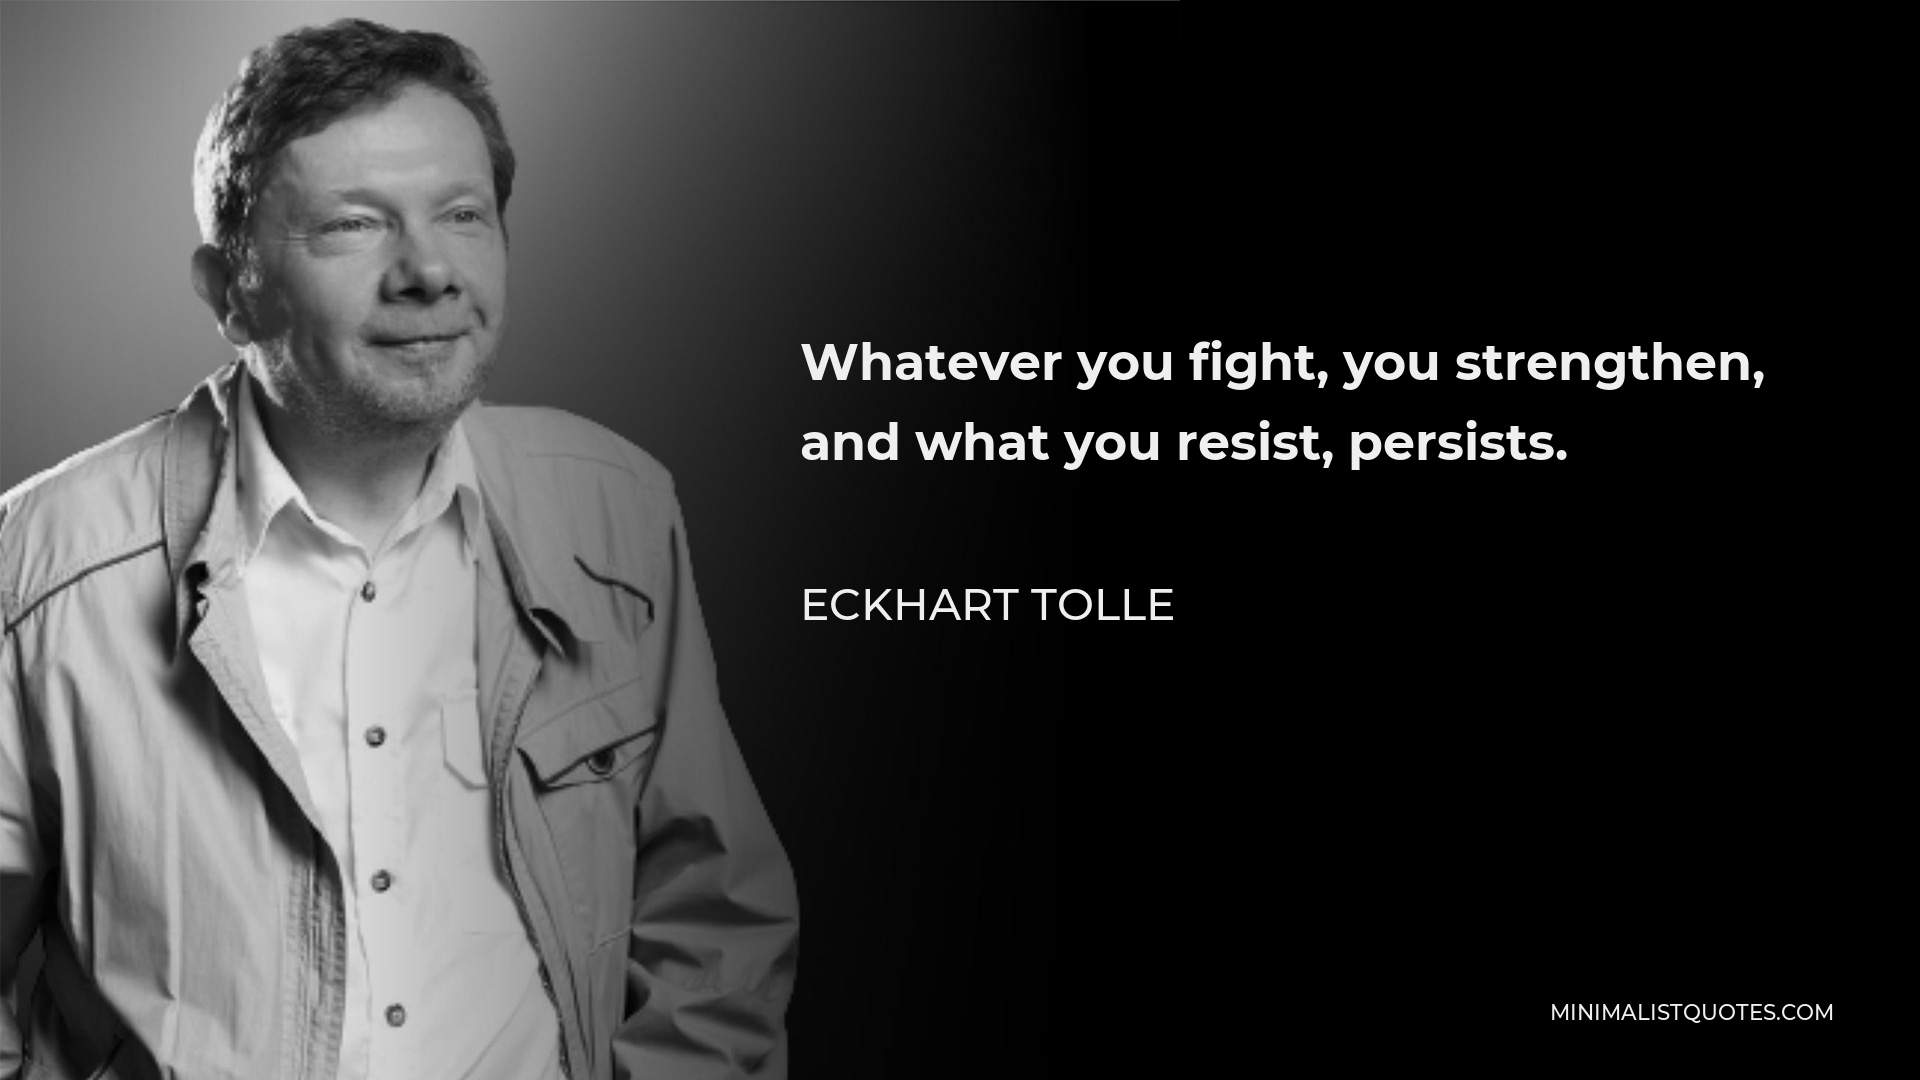 Eckhart Tolle Quote - Whatever you fight, you strengthen, and what you resist, persists.